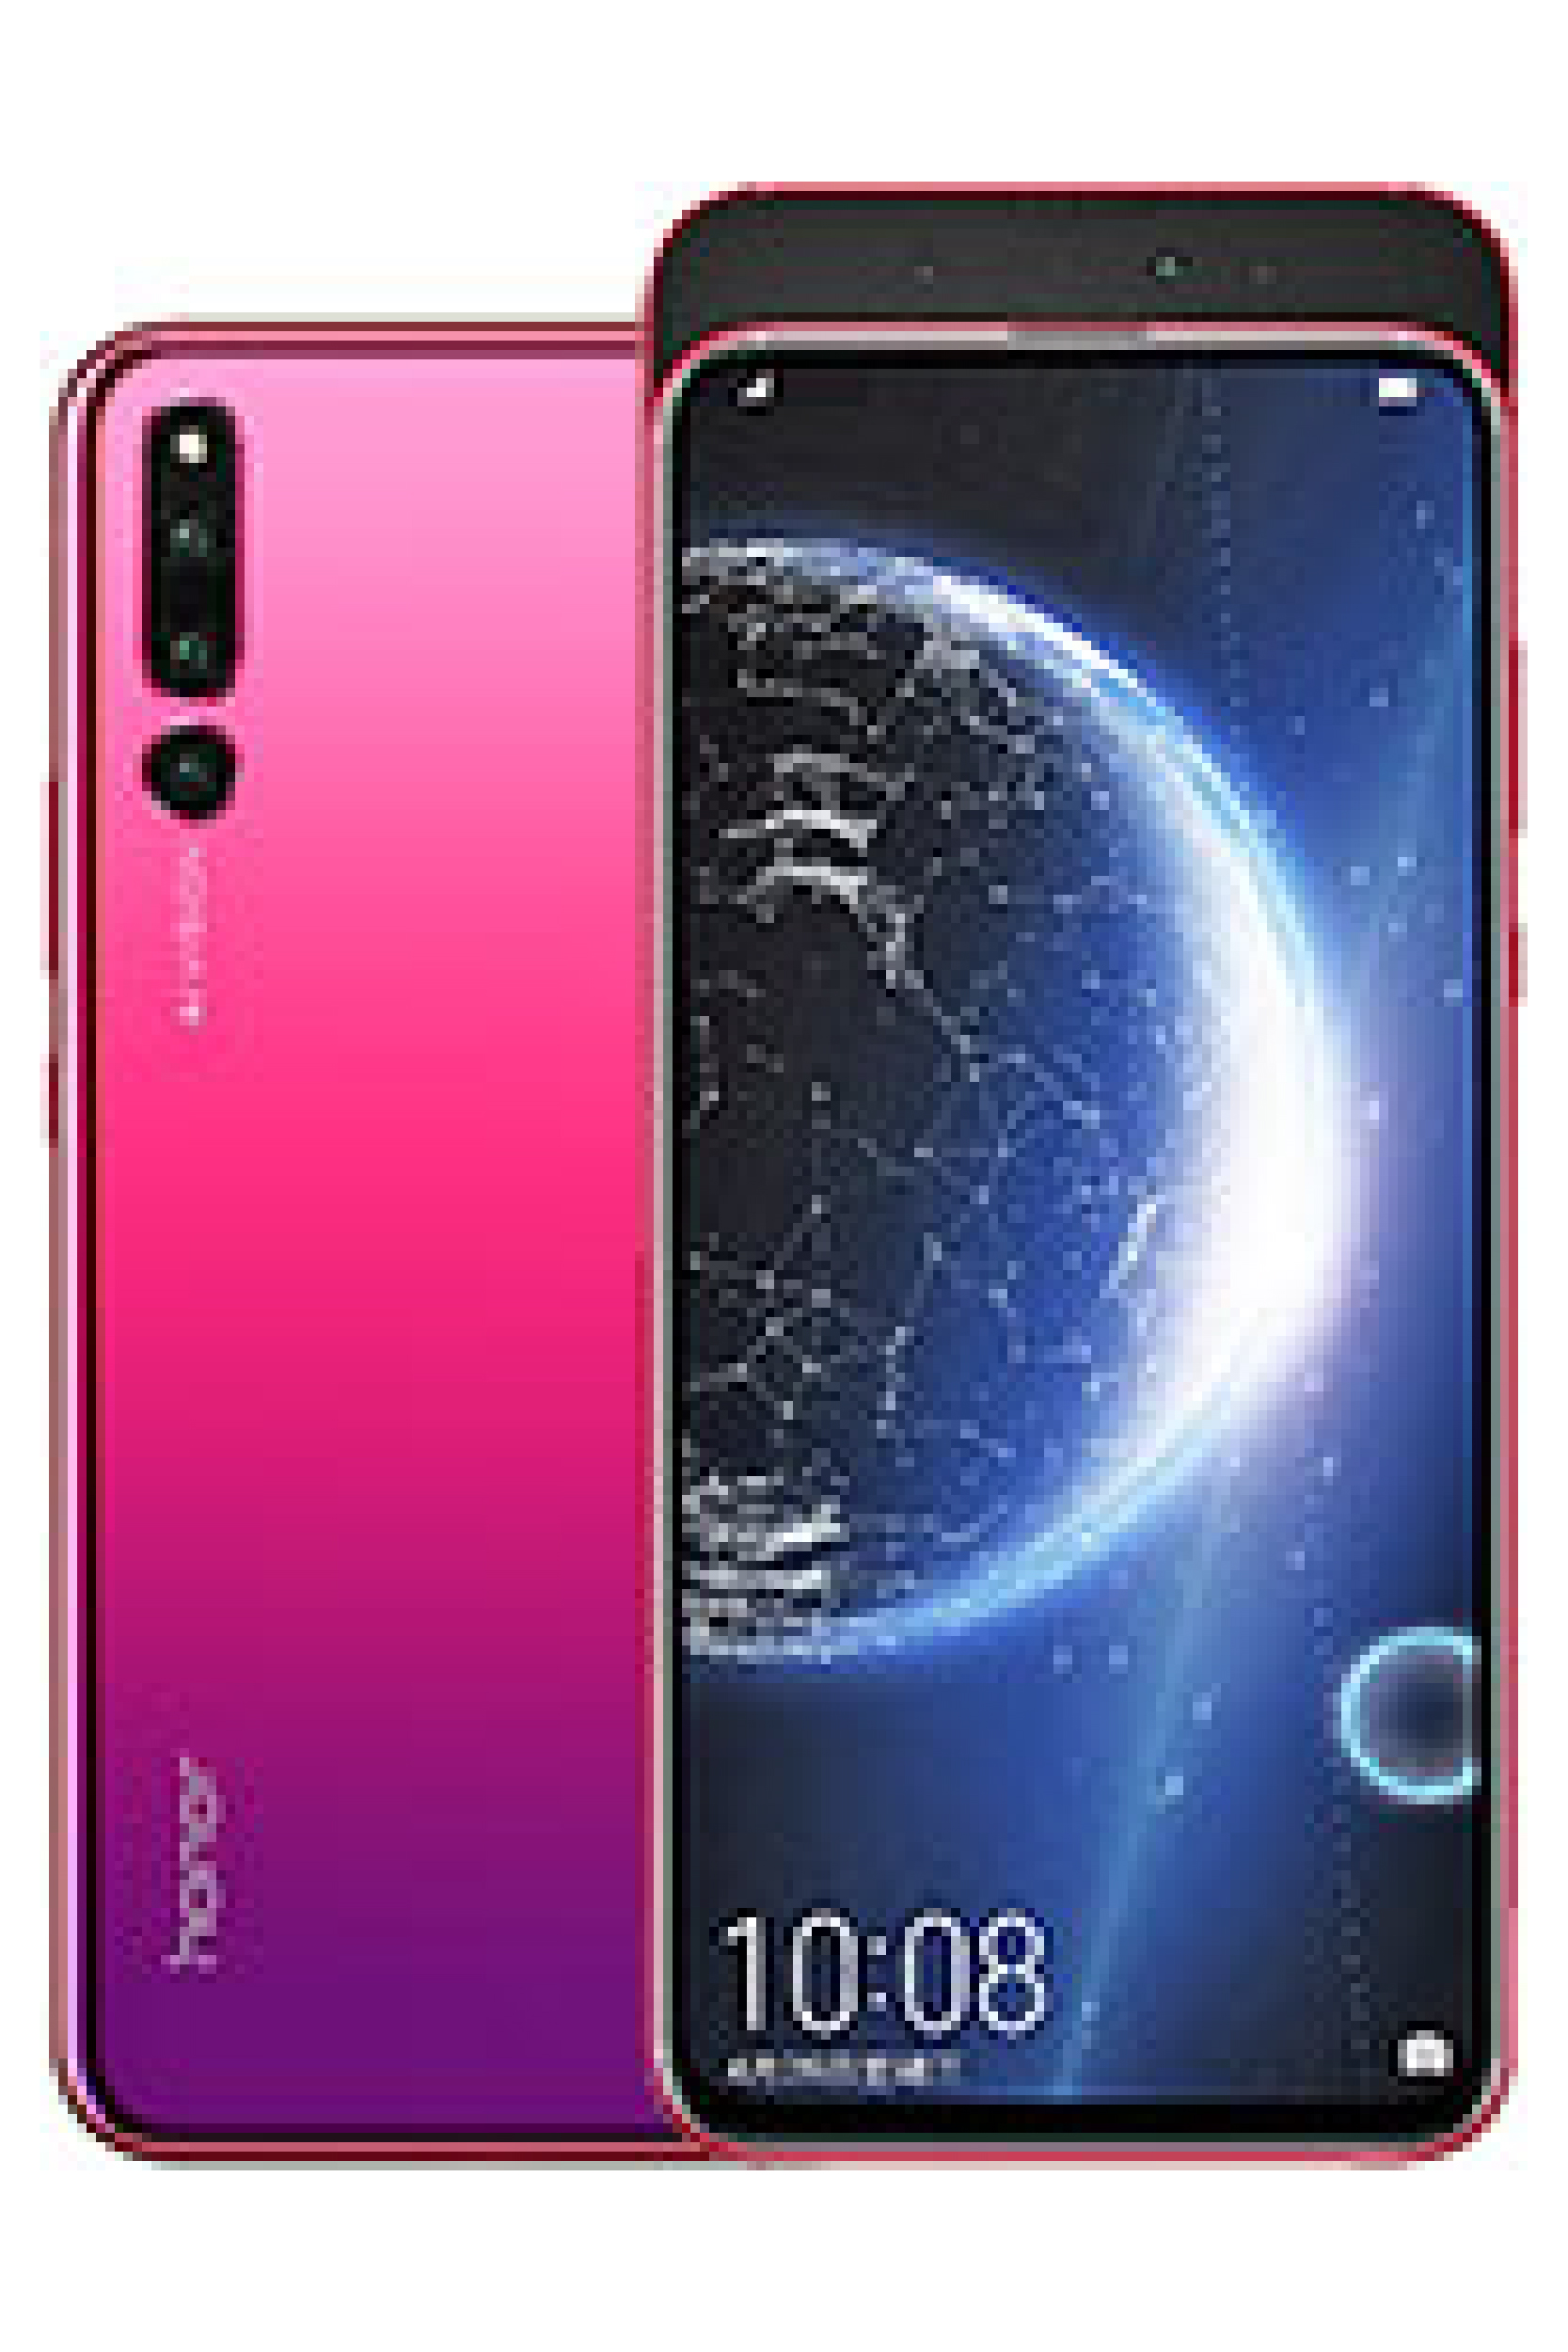 Honor Magic 2 pictures, official photos